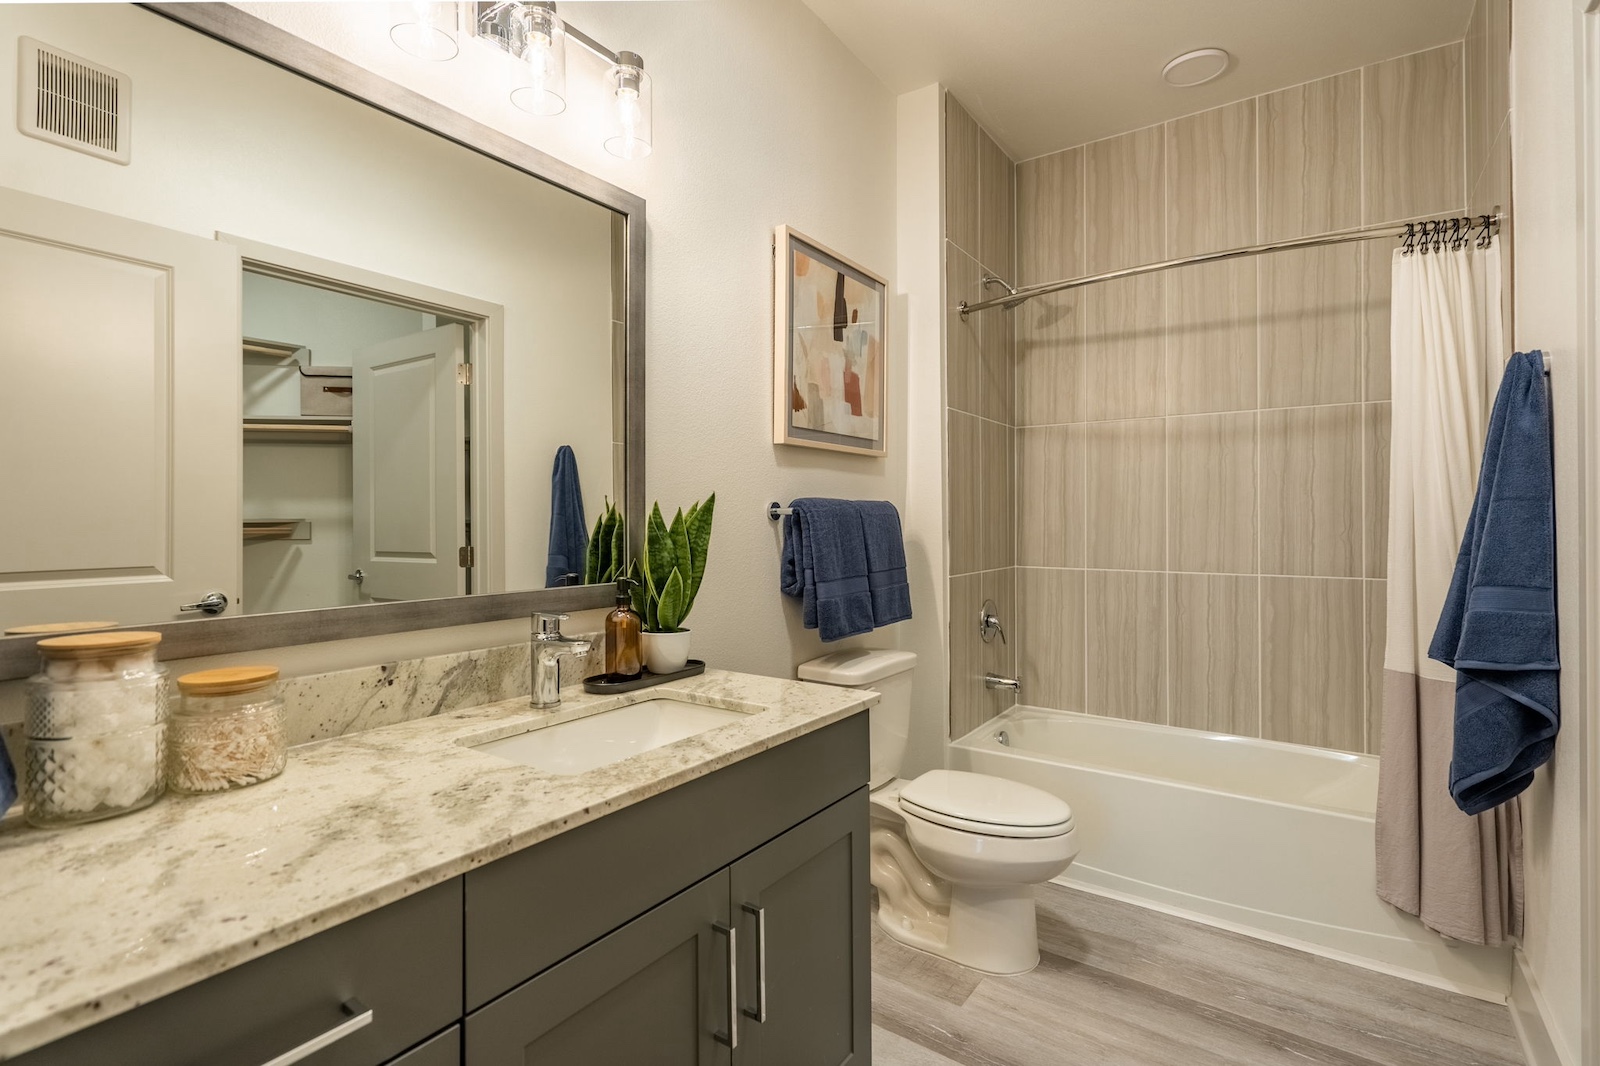 Bathroom with granite countertops and modern tile at our Cypress, TX apartments for rent. Residences